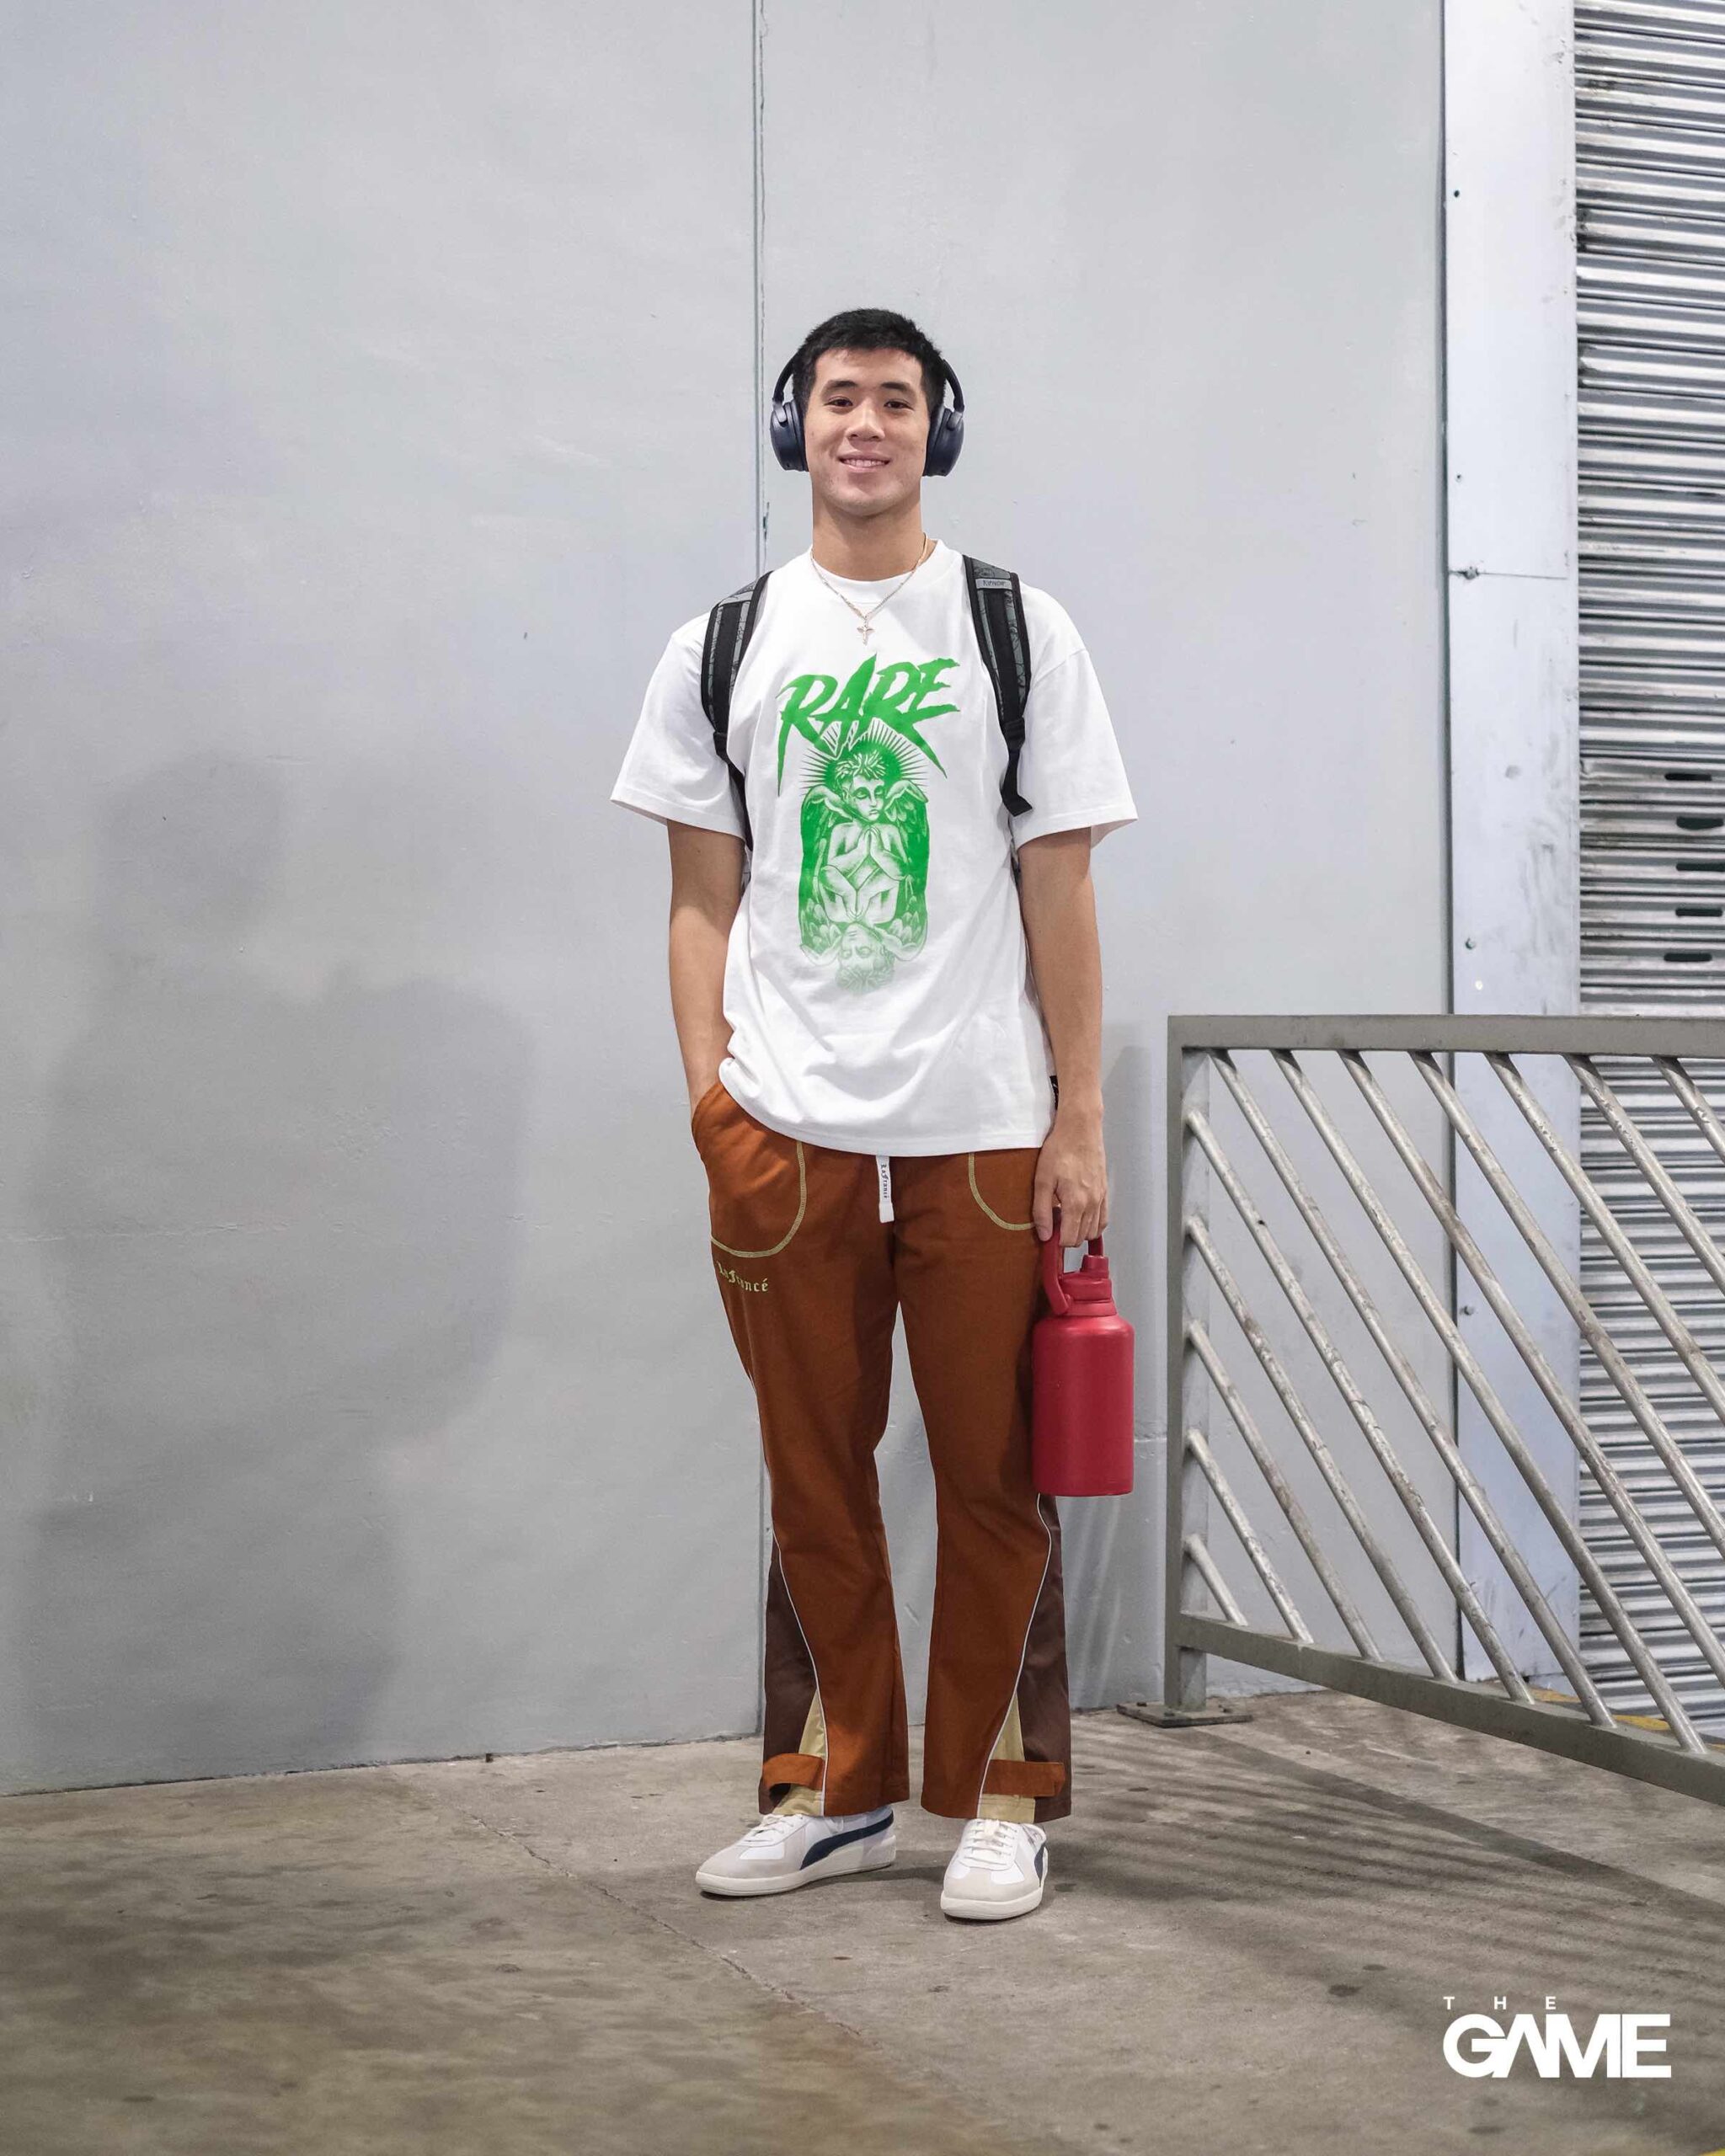 DLSU vs UP (UAAP Round 2 Outfits): Chico Briones